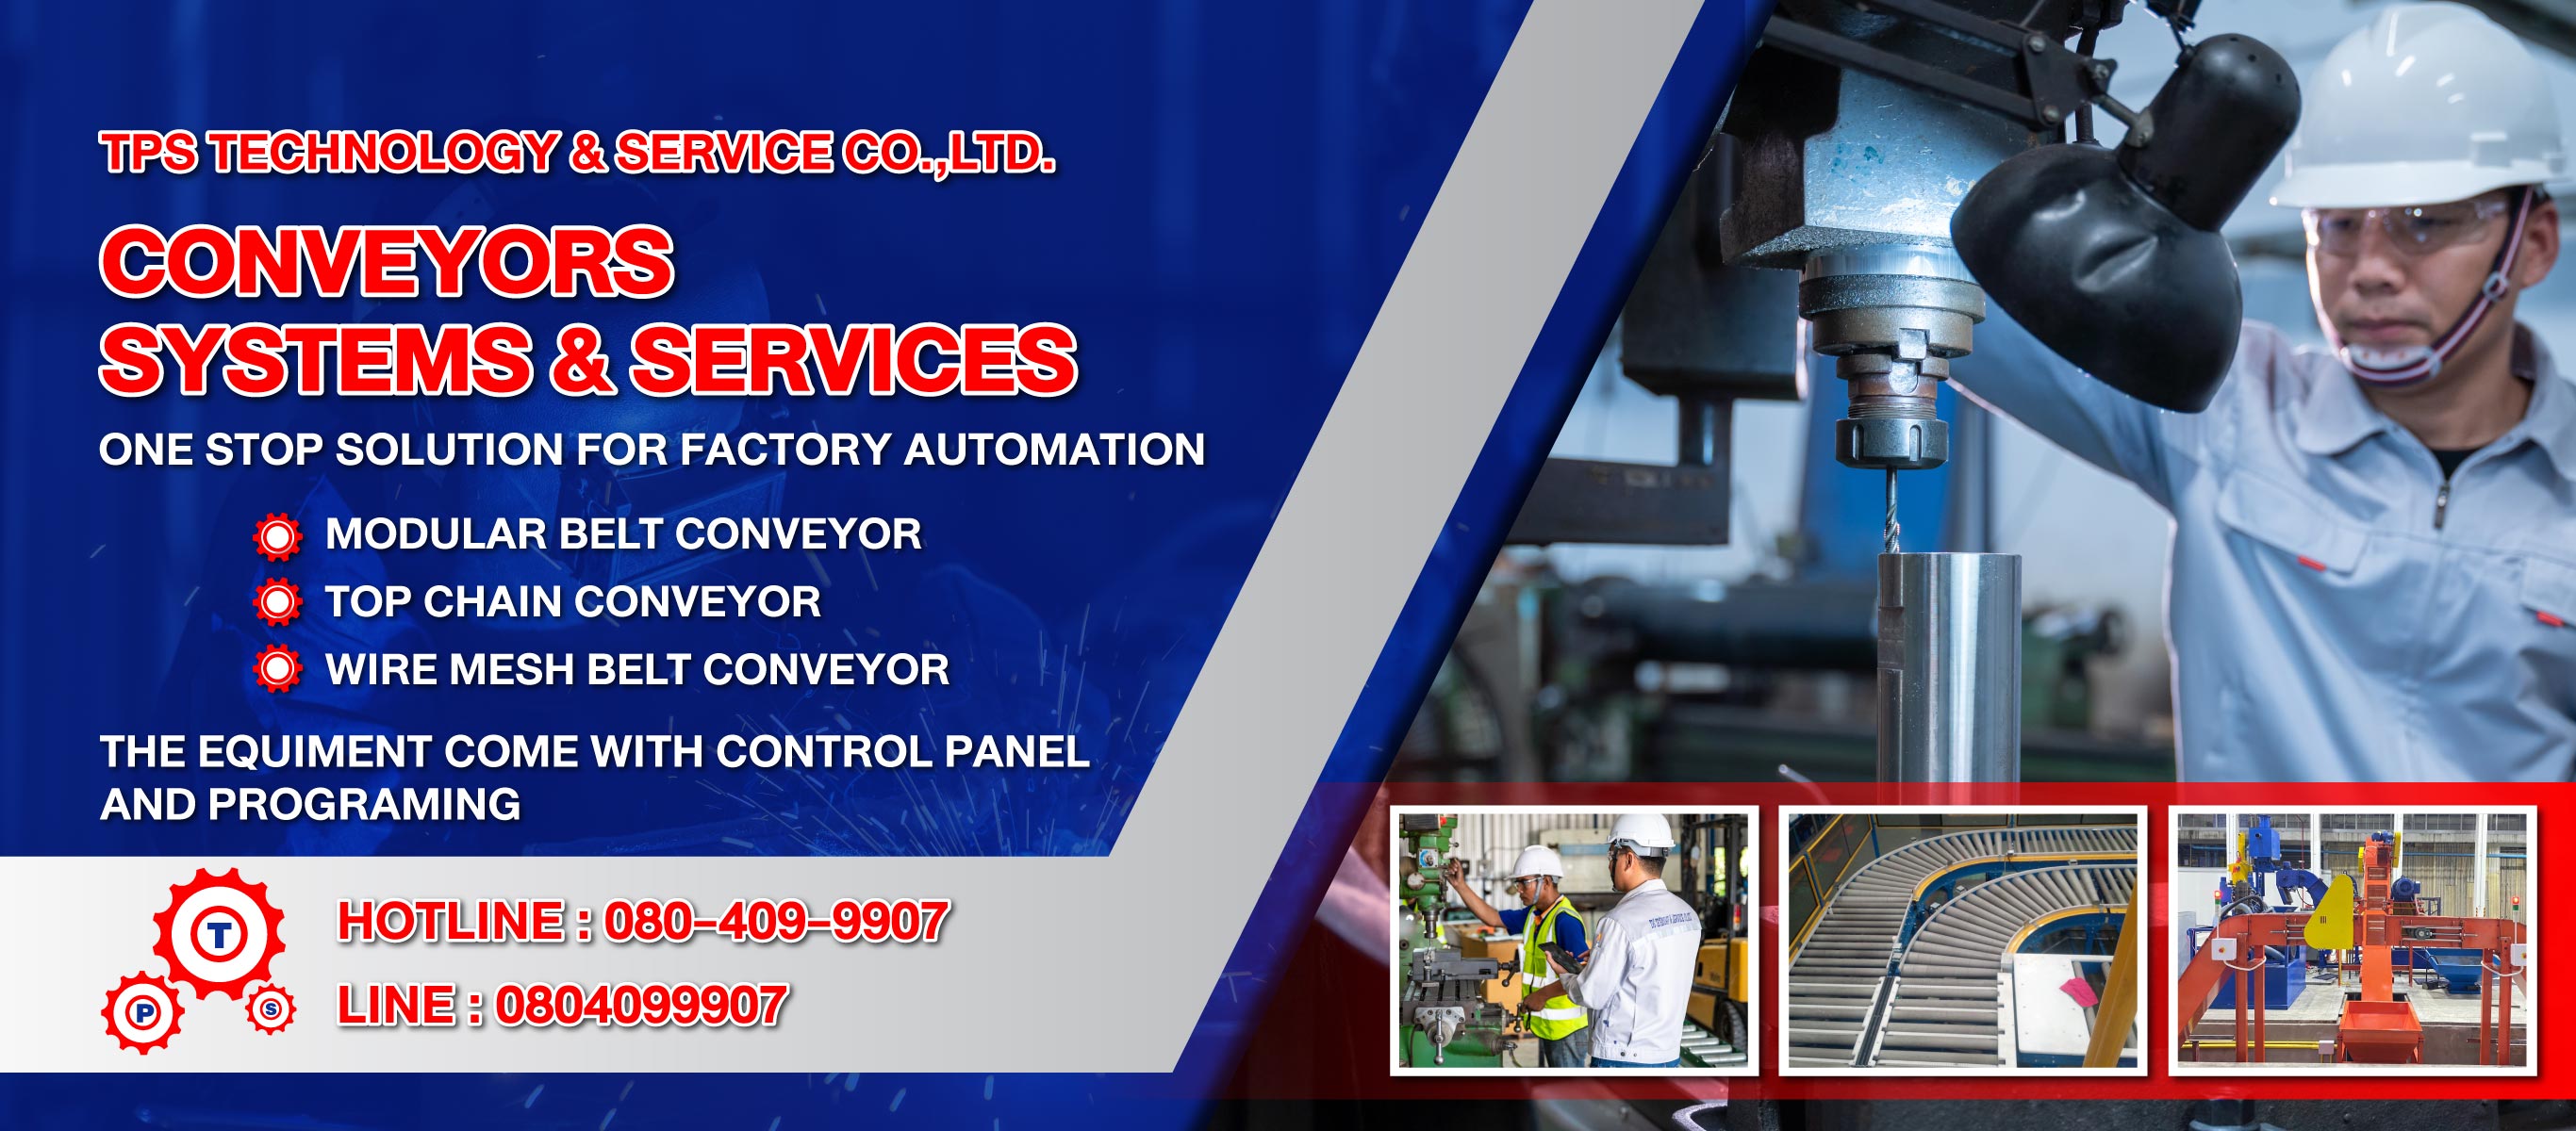 CONVEYORS SYSTEMS & SERVICES